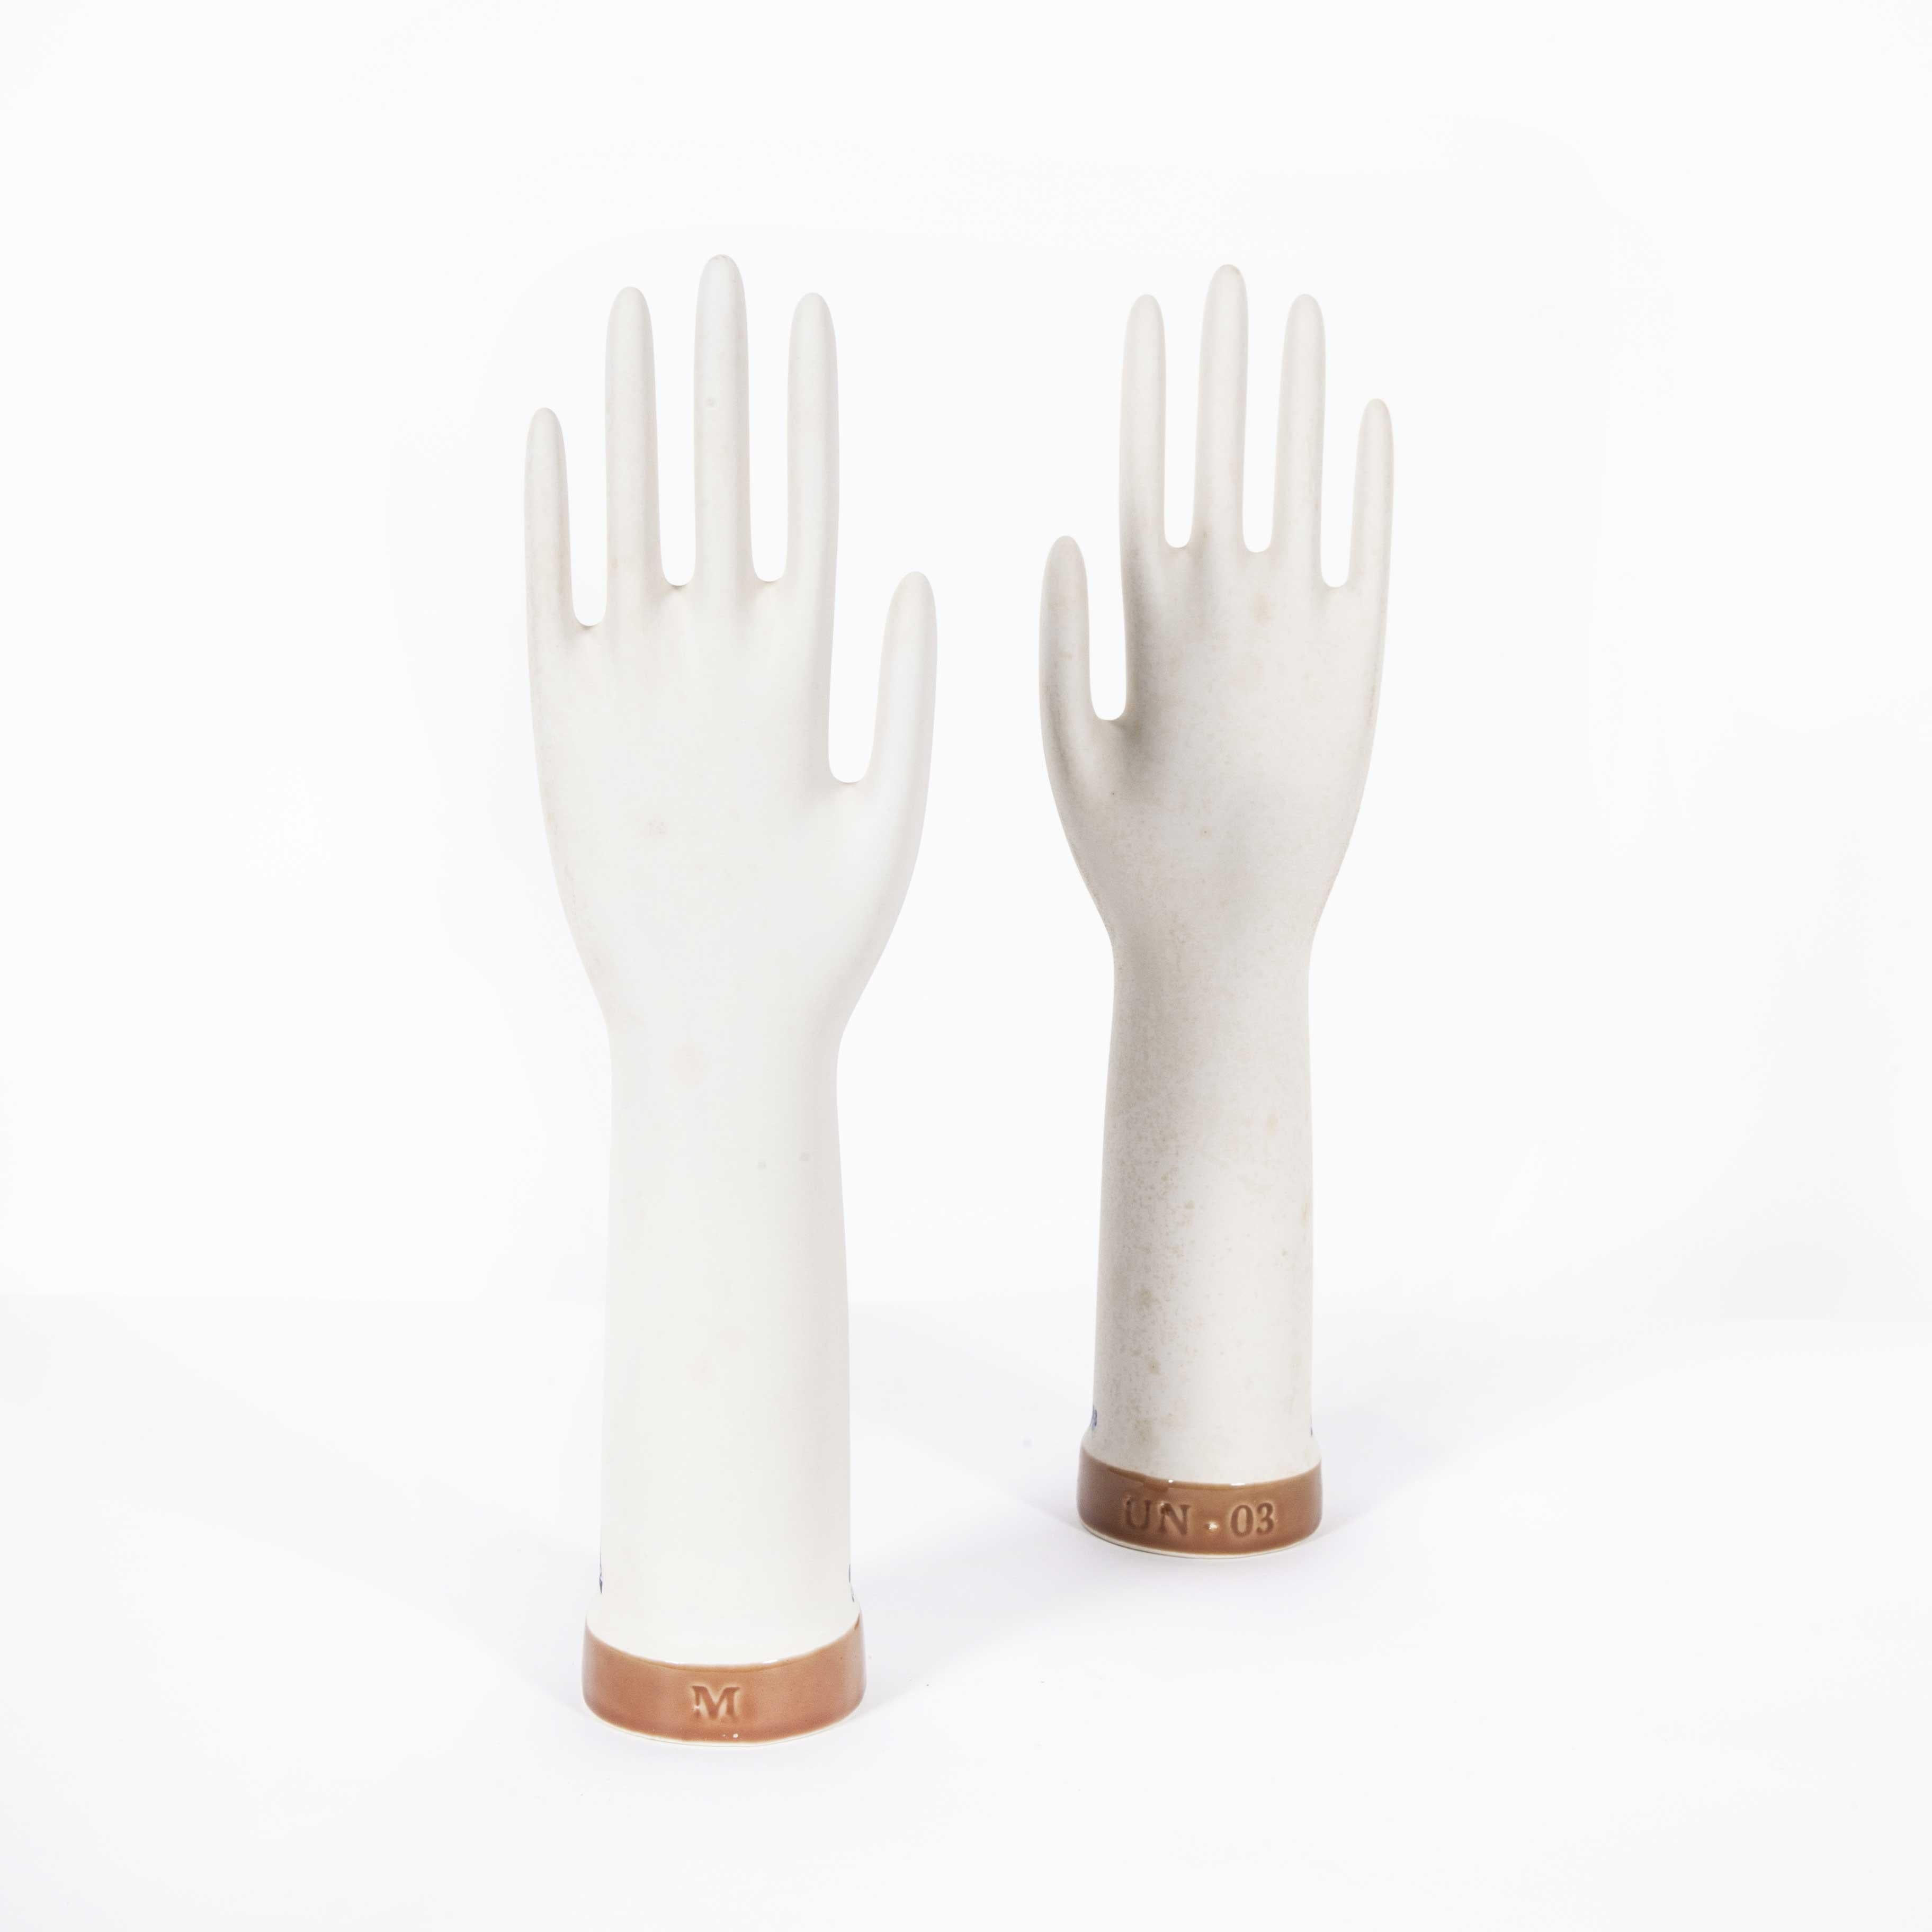 New Old Stock Ceramic Rubber Glove Hand Moulds, Singles 'Red Base' For ...